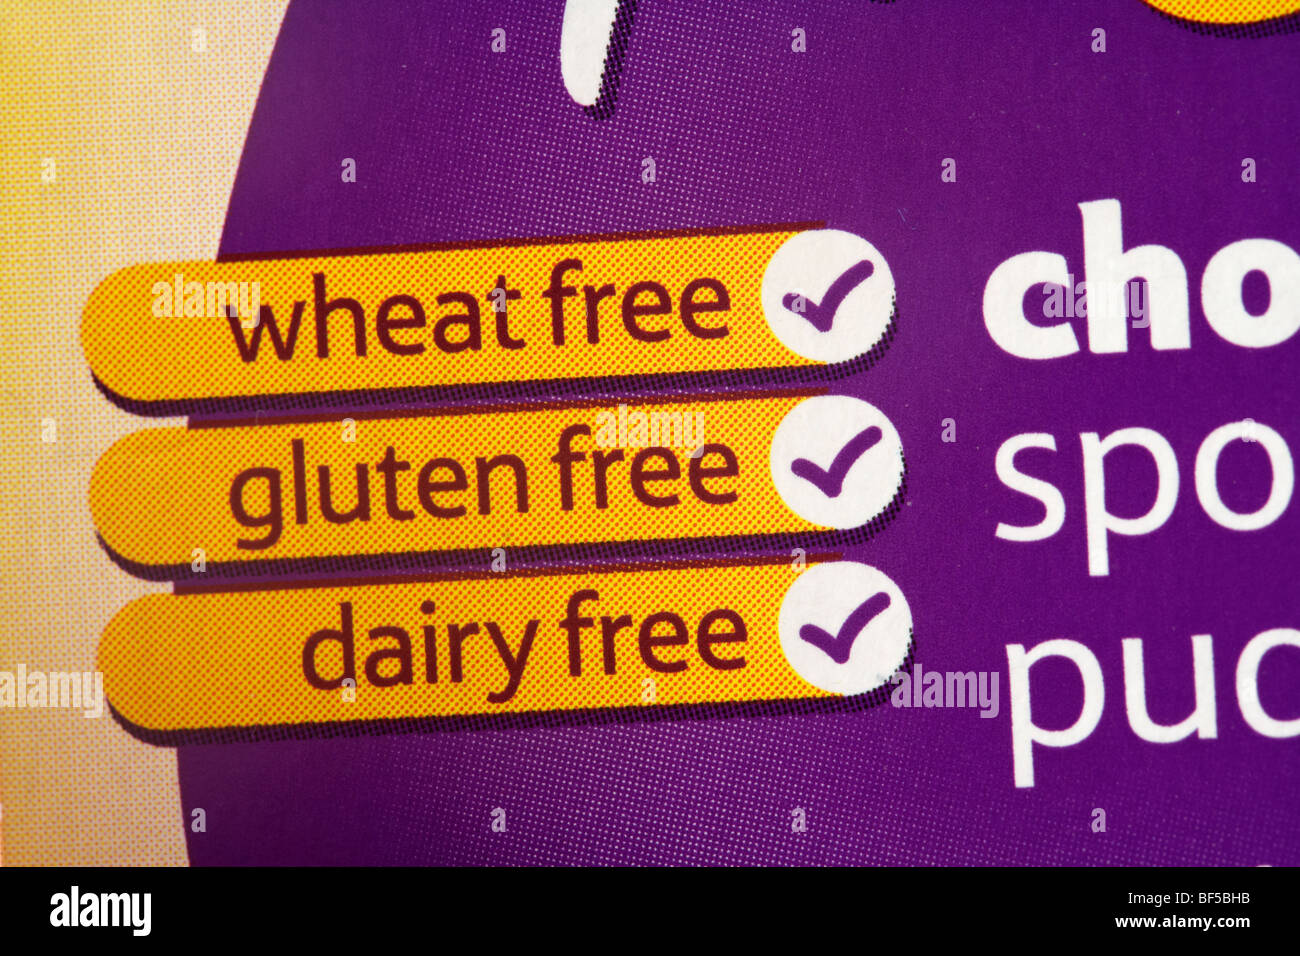 food label on in the uk showing wheat free gluten free and dairy free Stock Photo